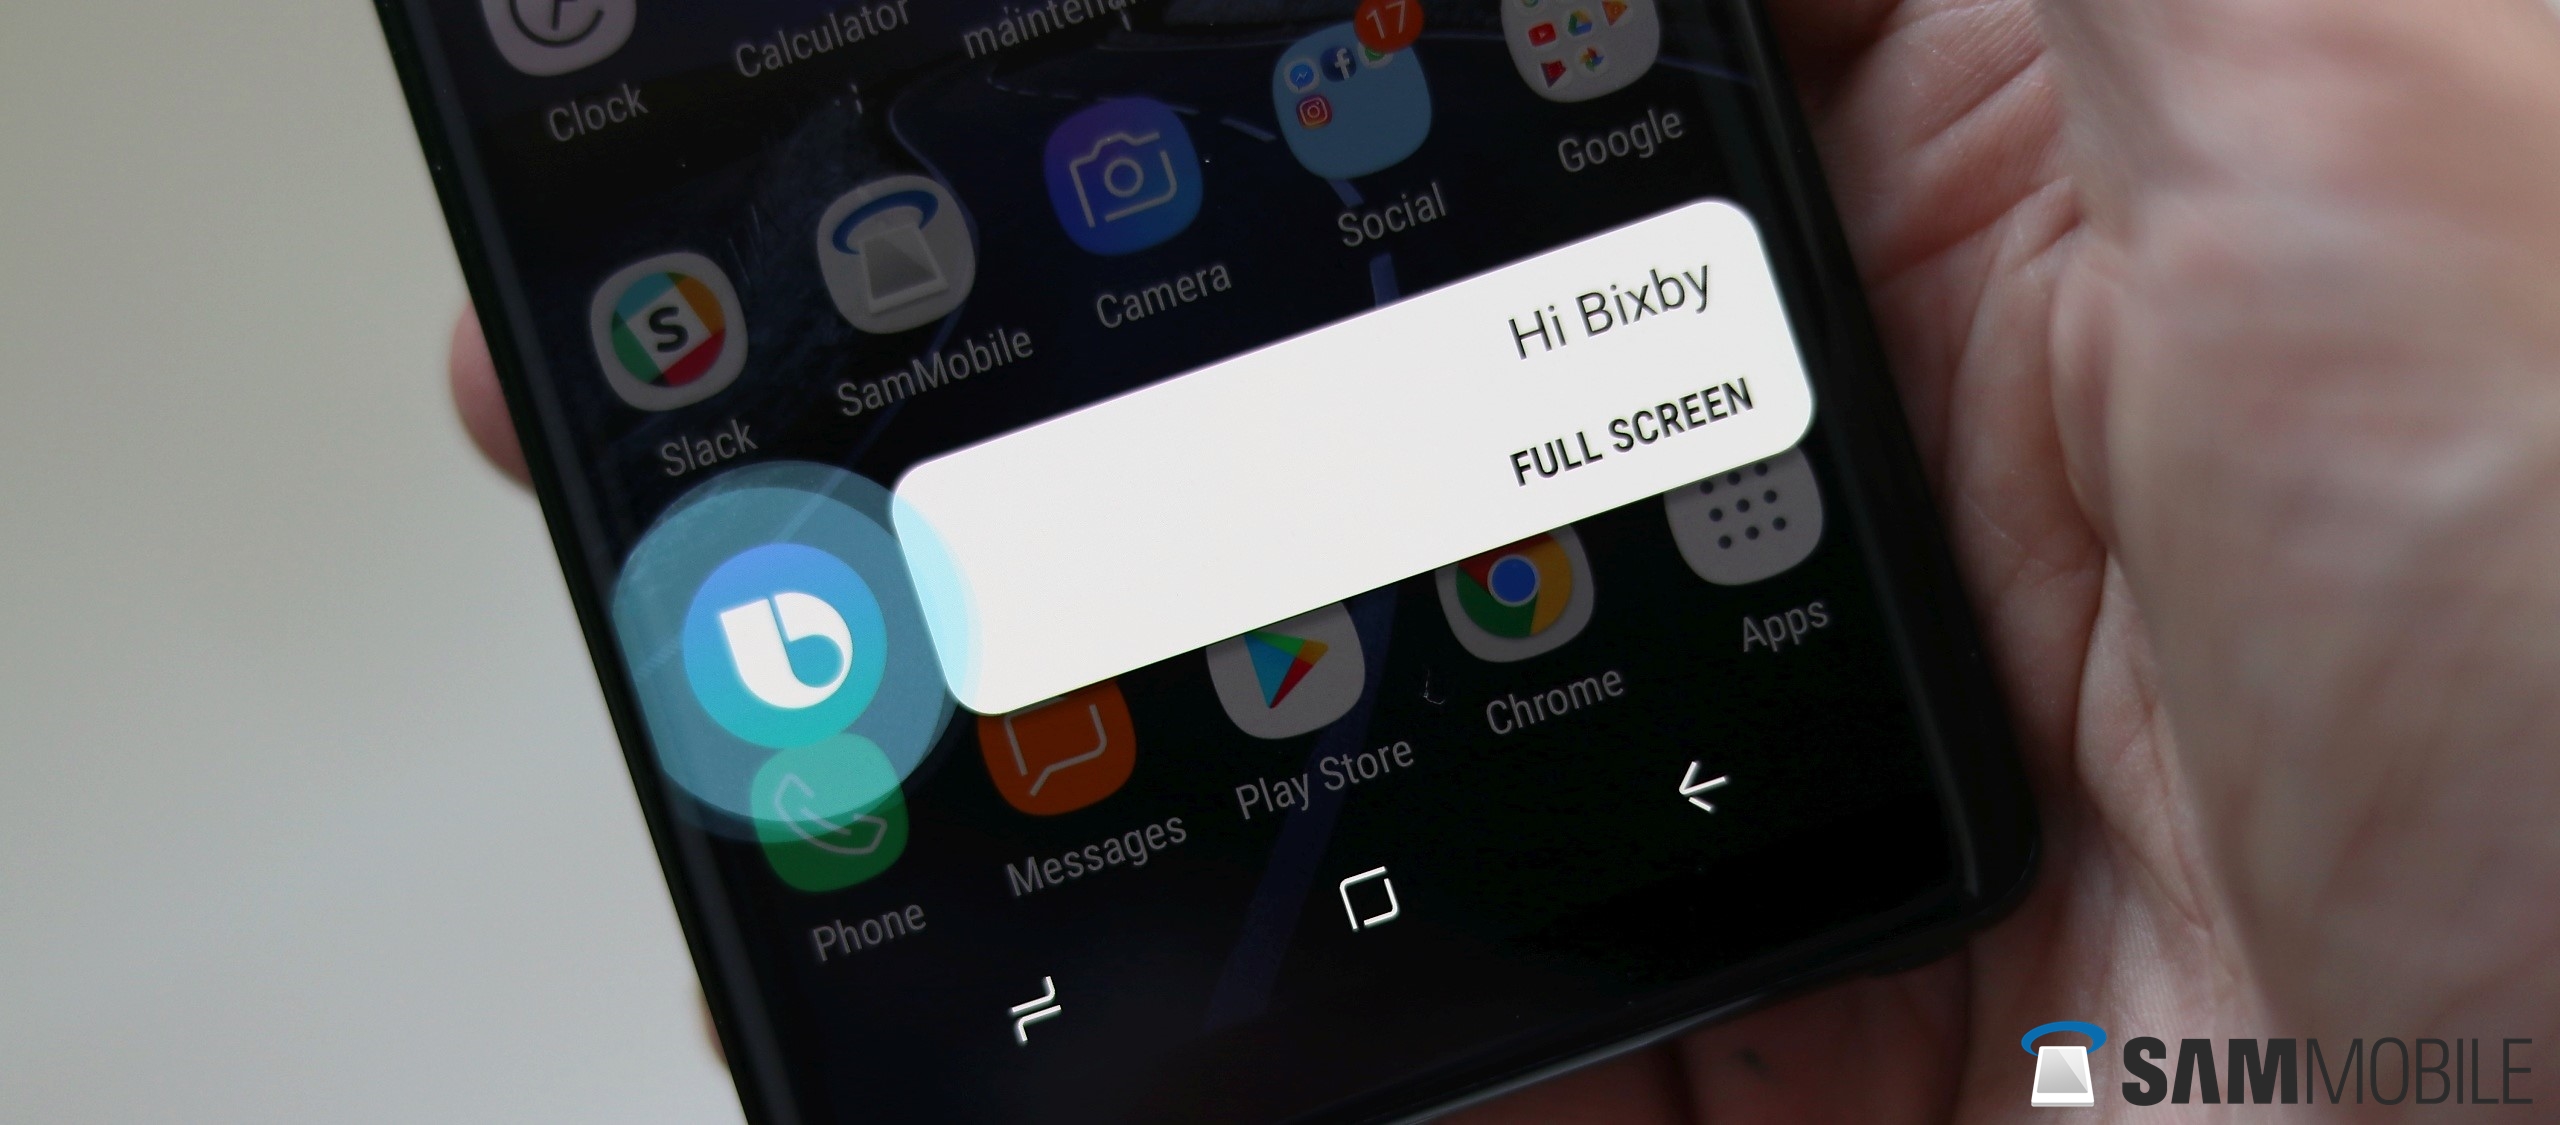 Exclusive: Galaxy S21 features to include Bixby Voice as a biometric option - SamMobile